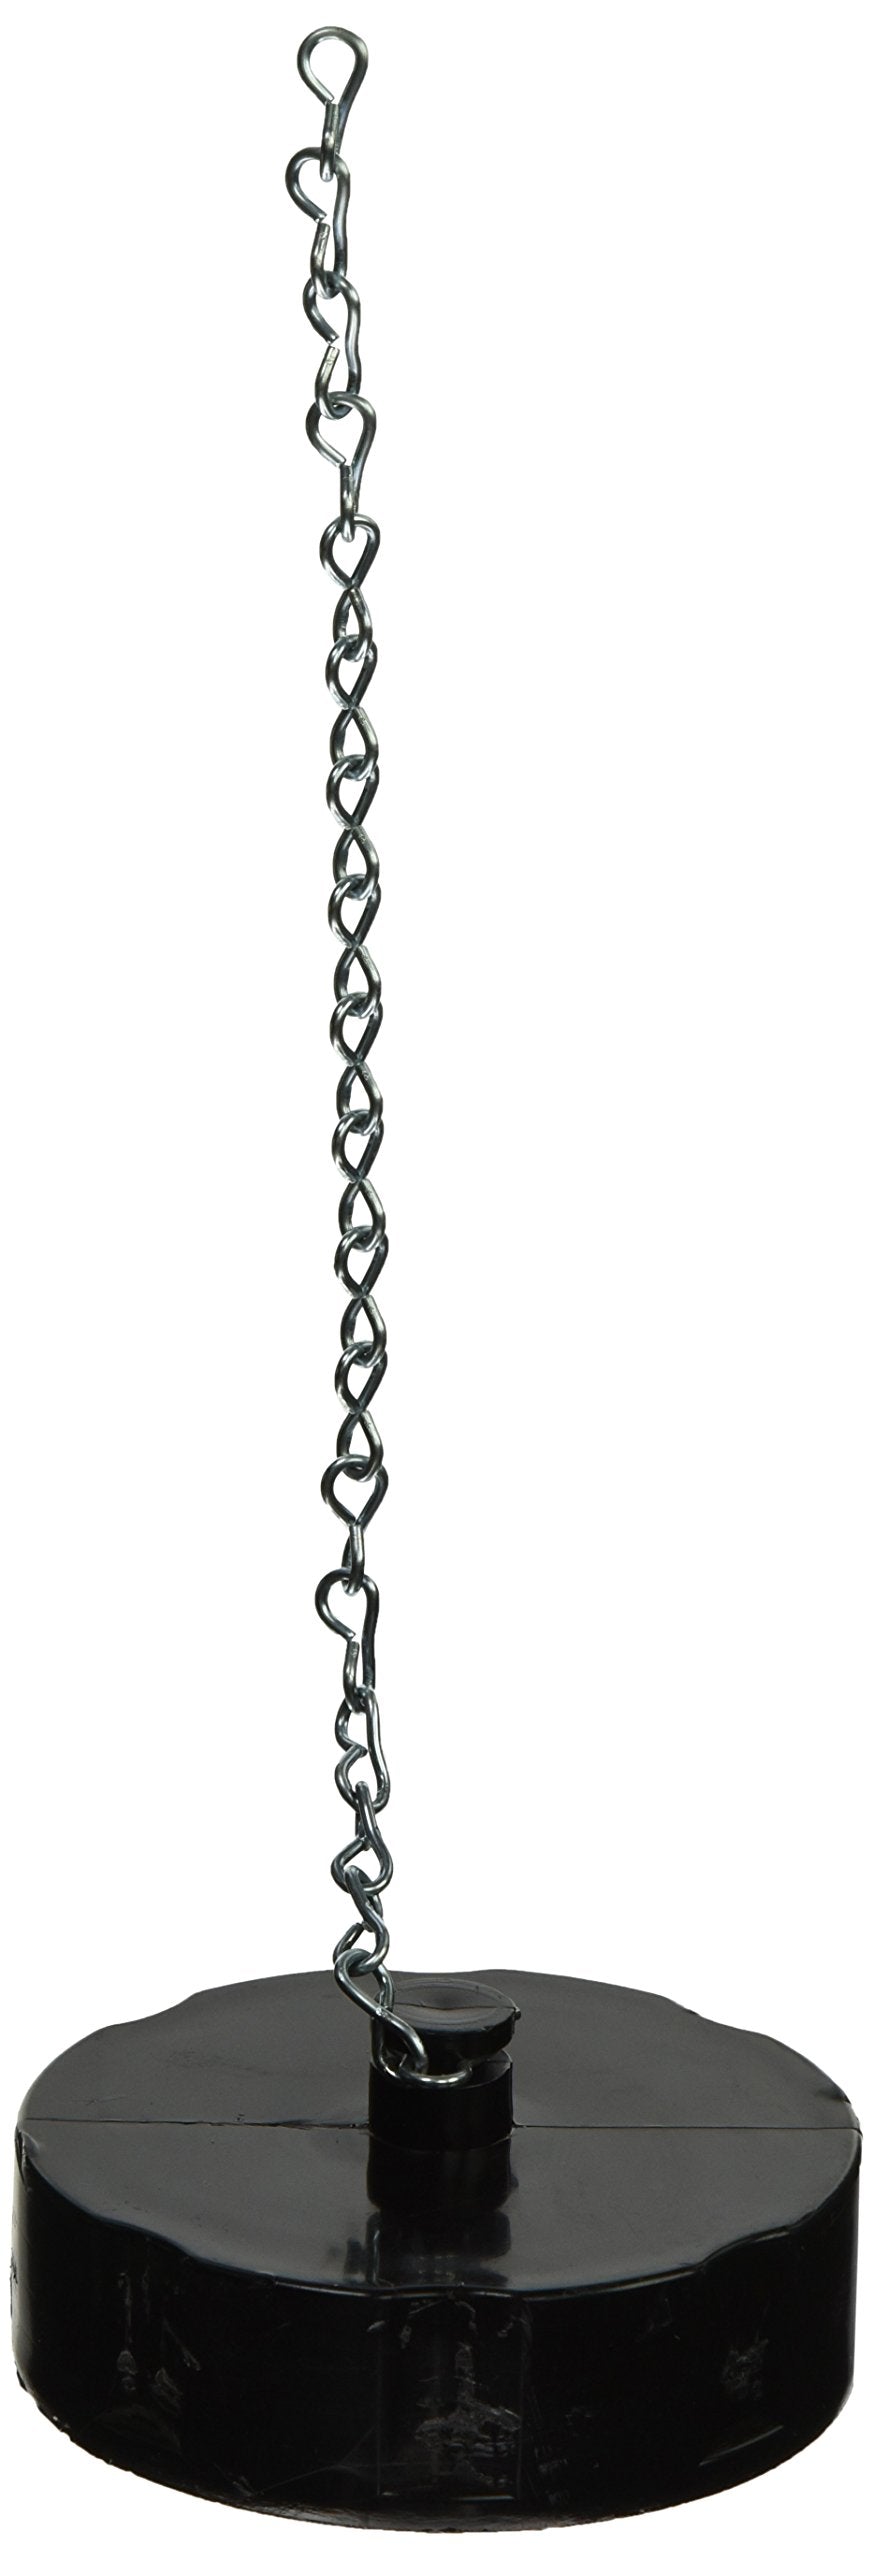 Valterra Products, Inc. F02-2018 3" Female Thread Cap with 10" Chain